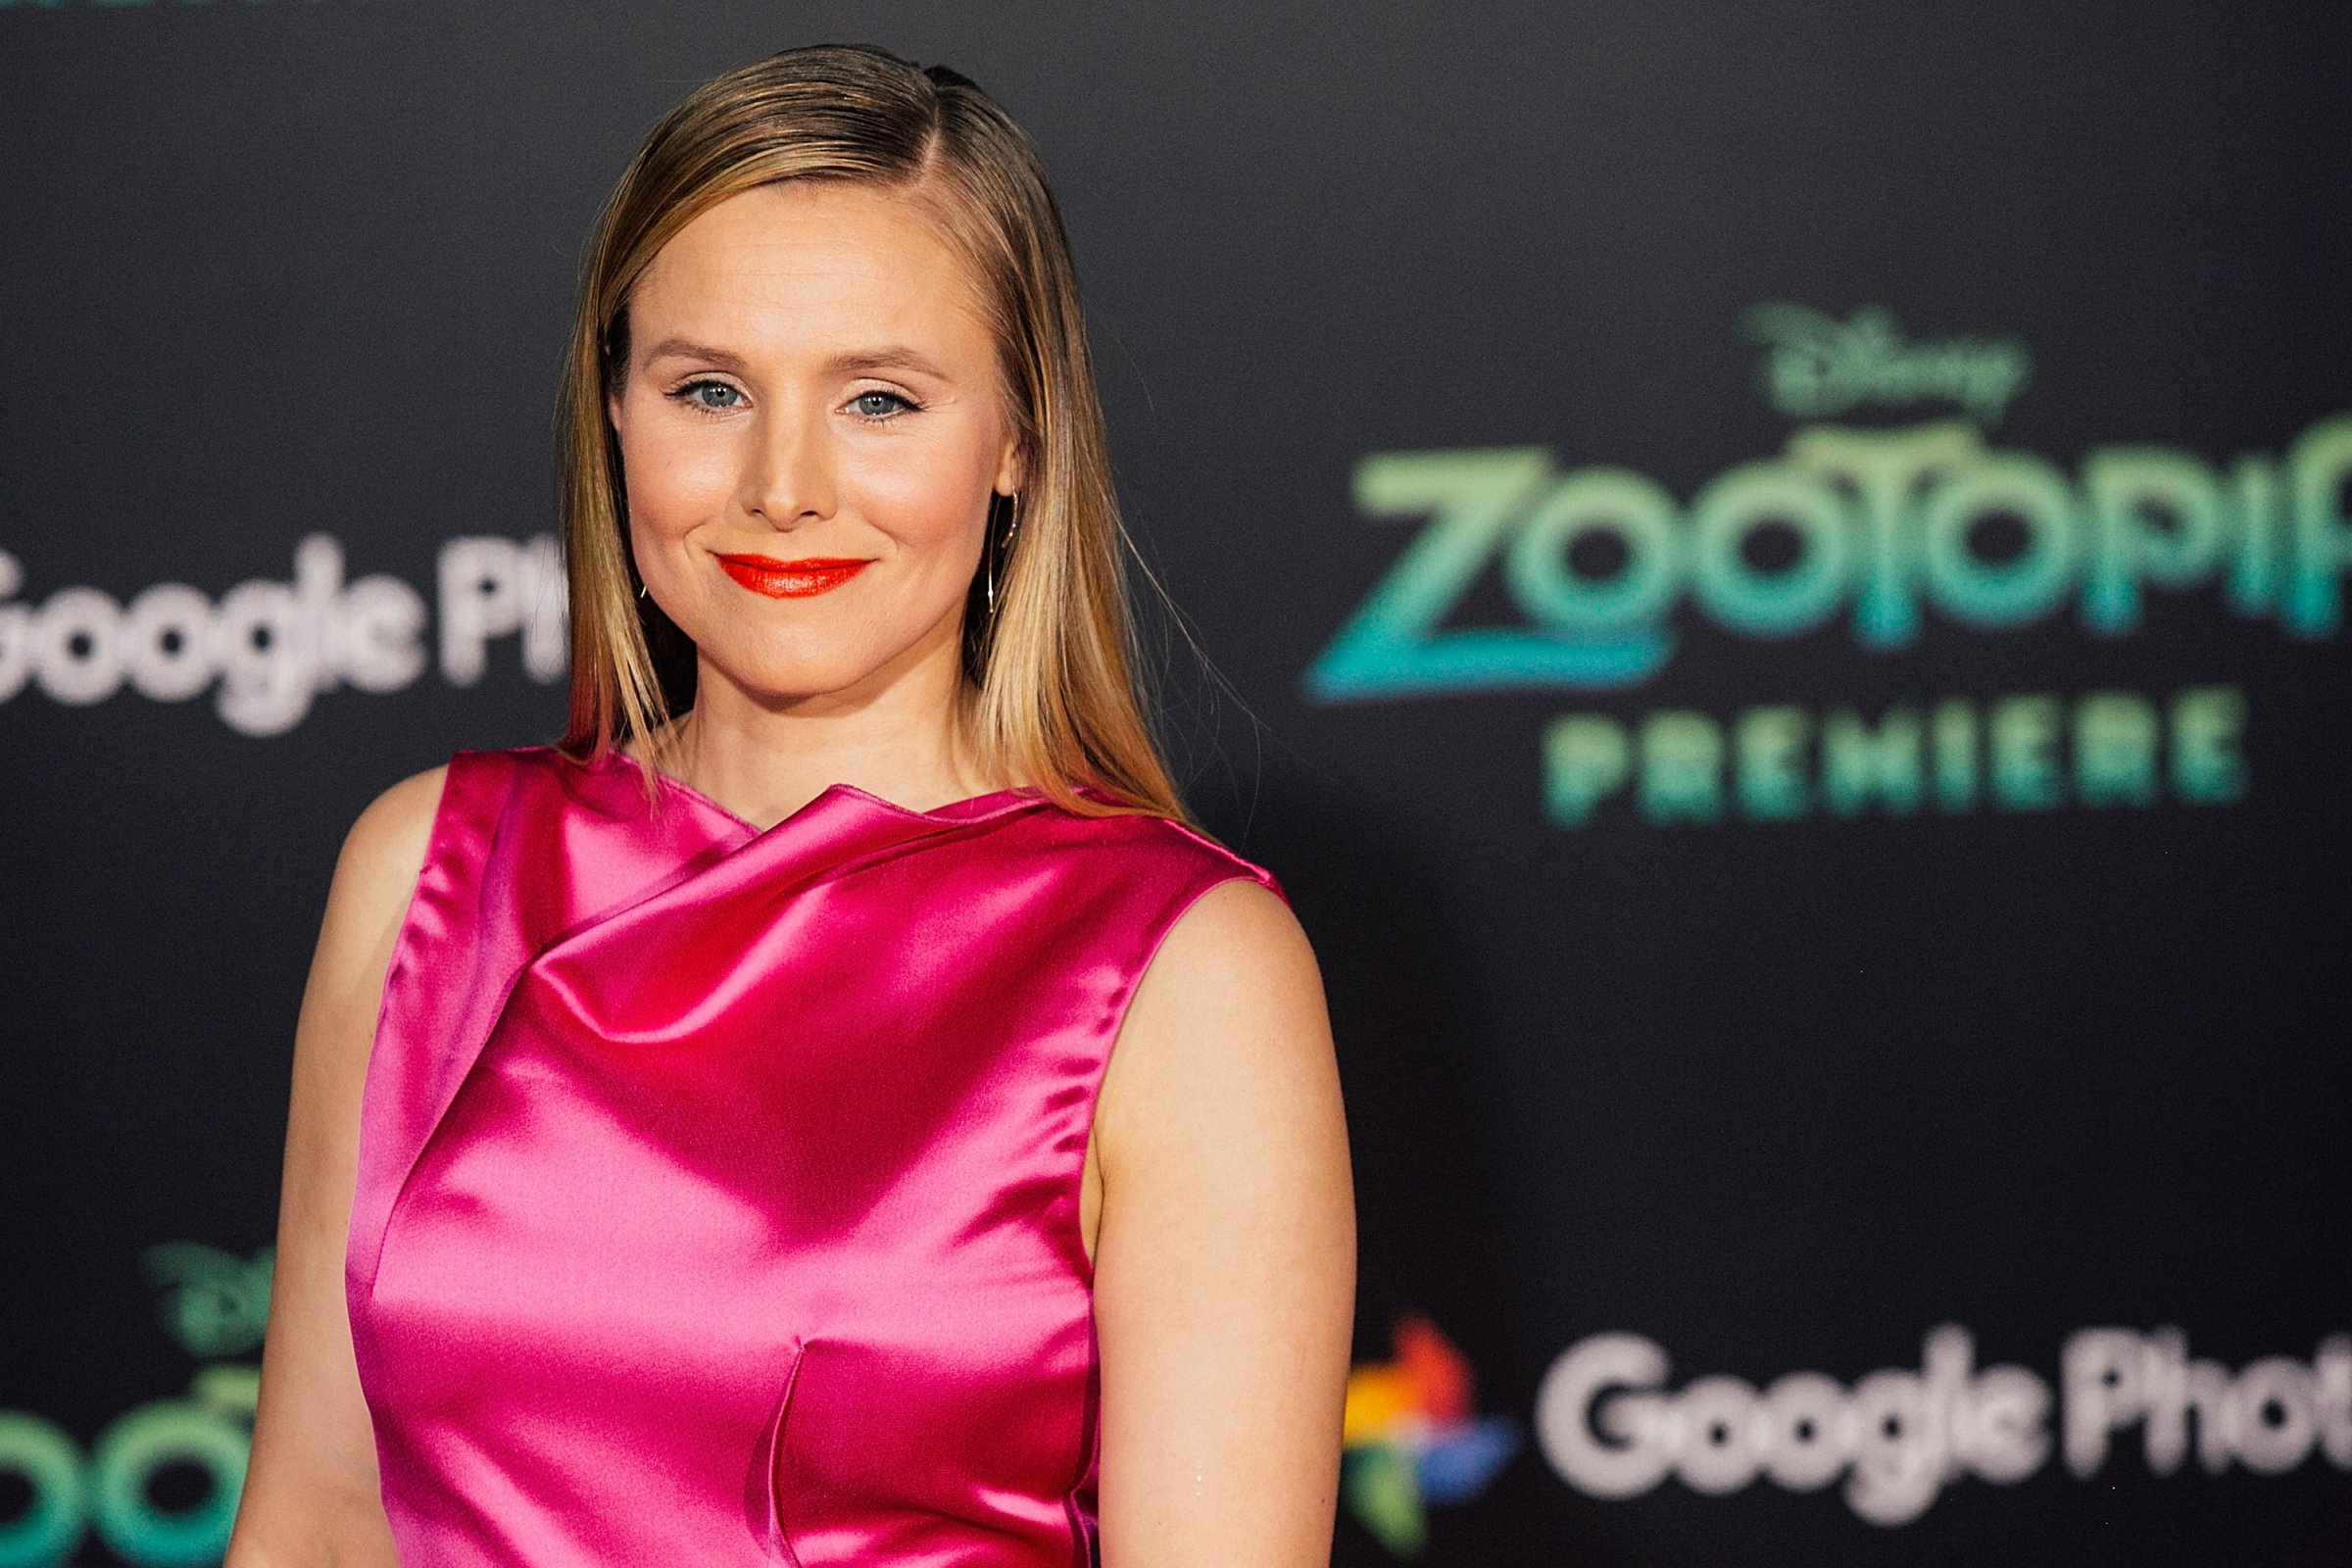 Kristen Bell arrives for the premiere of Walt Disney Animation Studios' "Zootopia" at the El Capitan Theatre on February 17, 2016 in Hollywood, California.